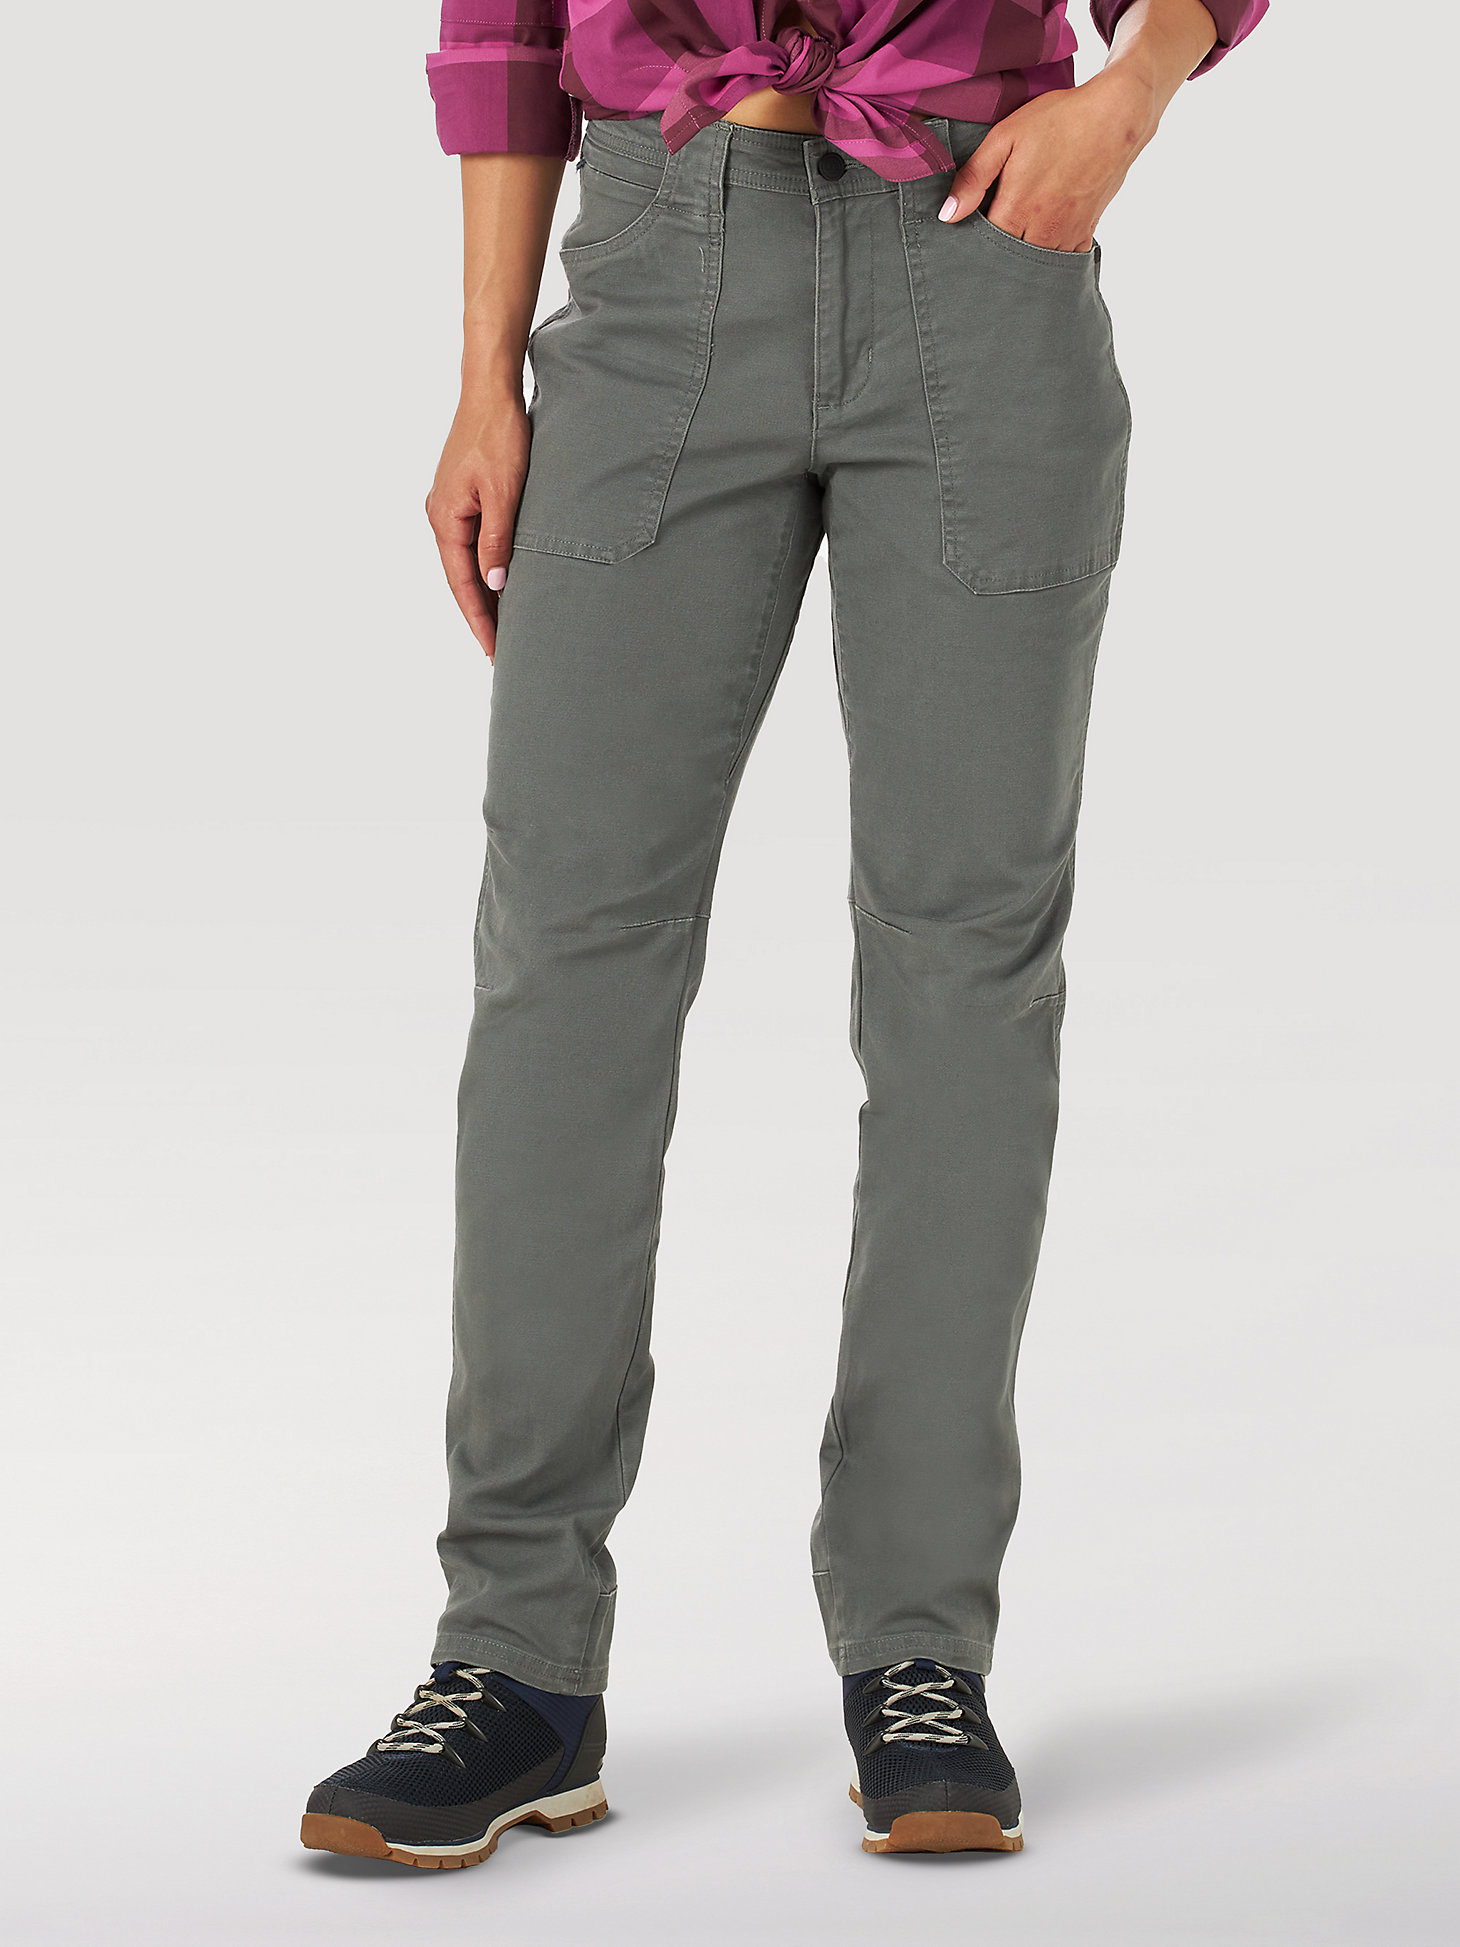 ATG By Wrangler™ Women's Canvas Pant in Dark Shadow main view